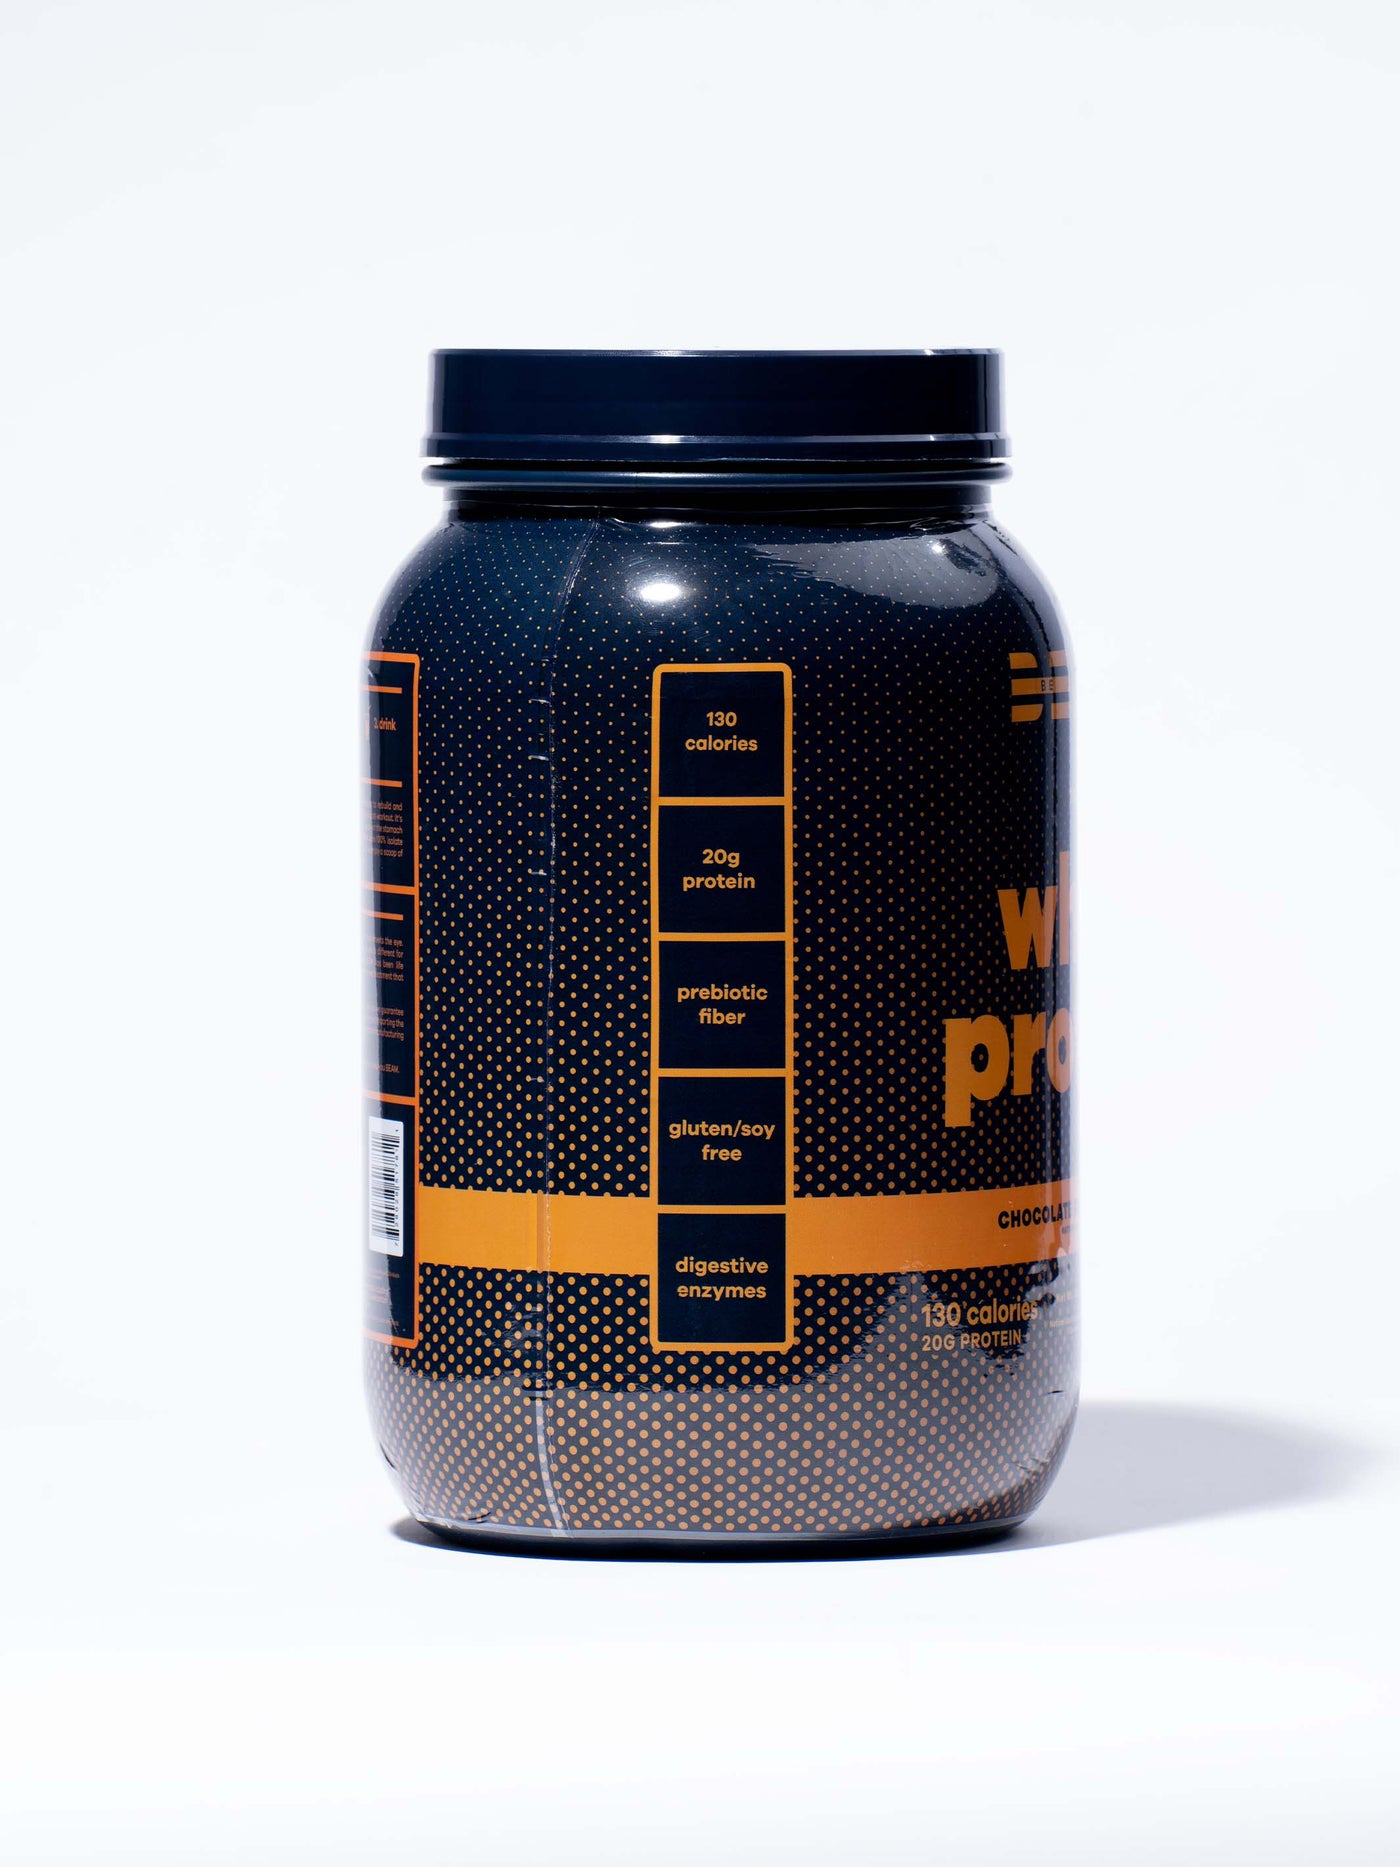 chocolate peanut butter whey protein side 1#25 Servings / Chocolate Peanut Butter